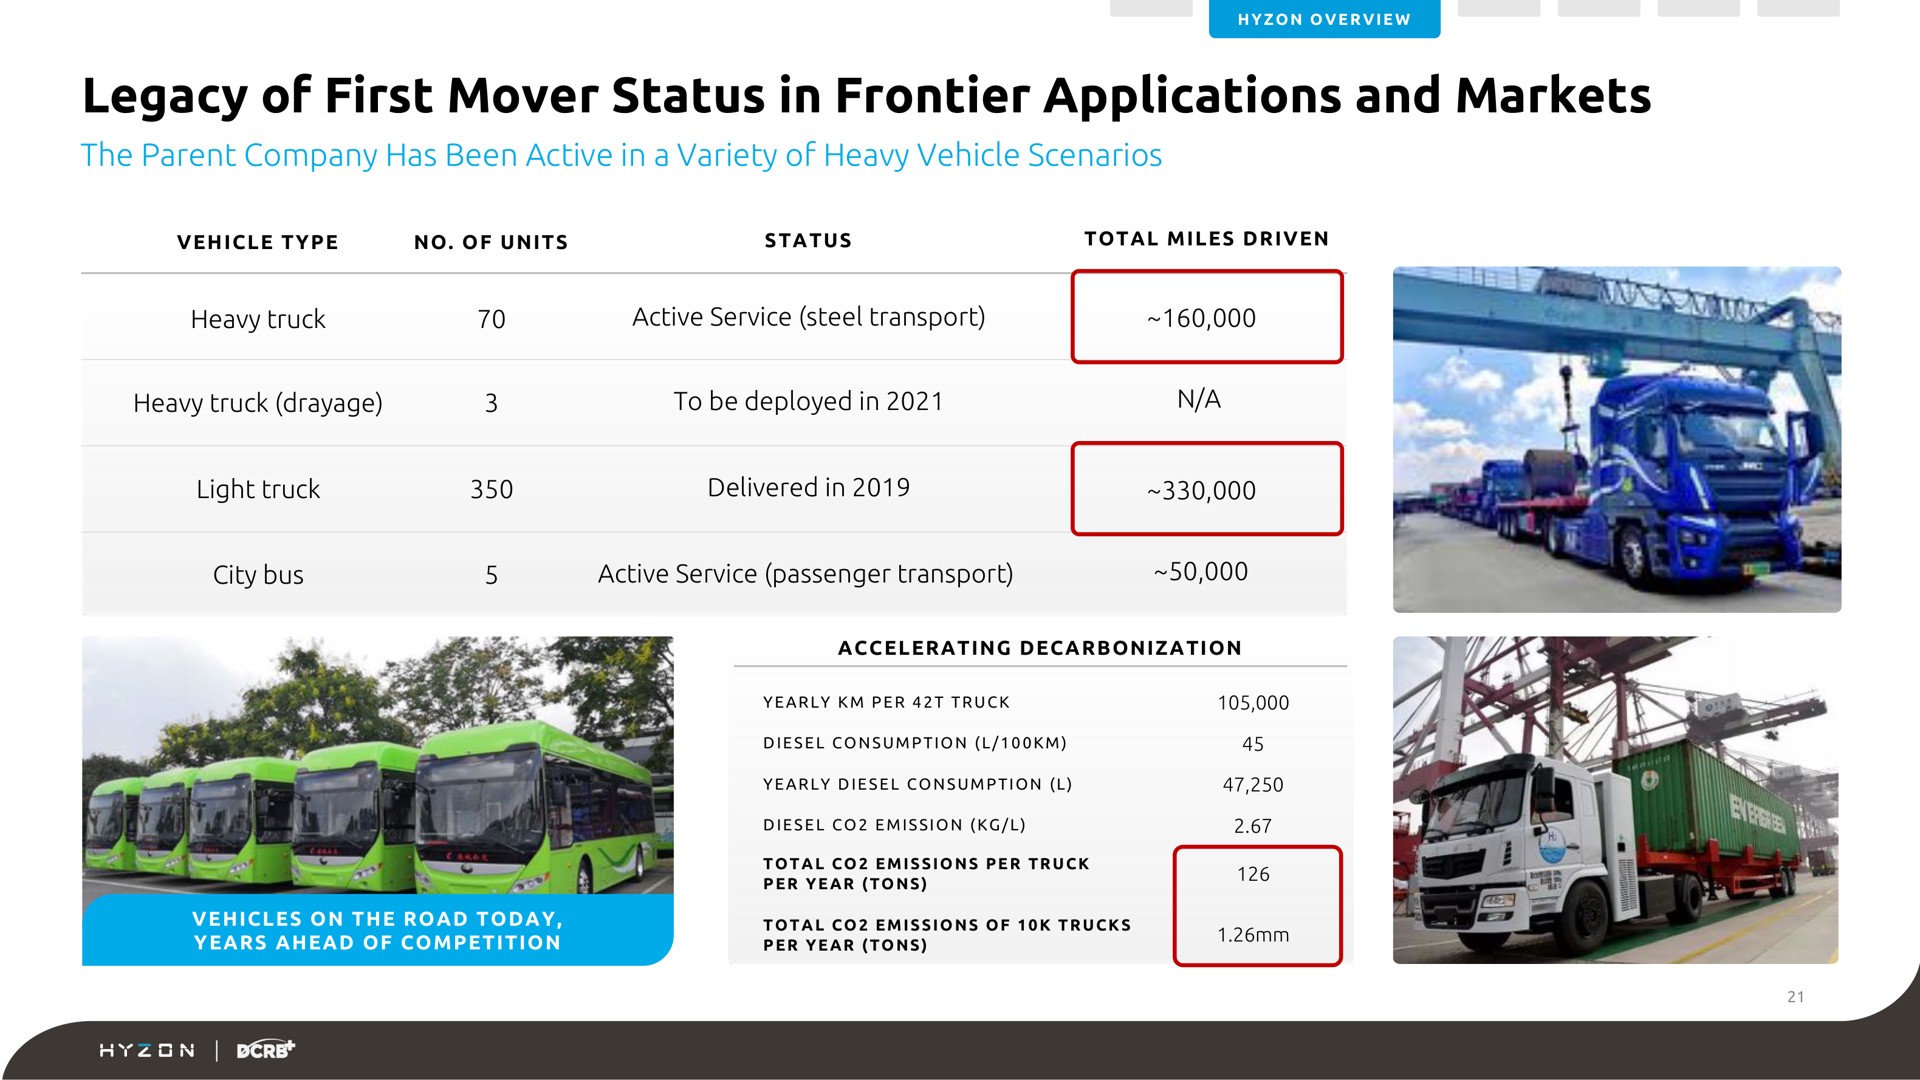 legacy of first mover status in frontier applications and markets | Hyzon